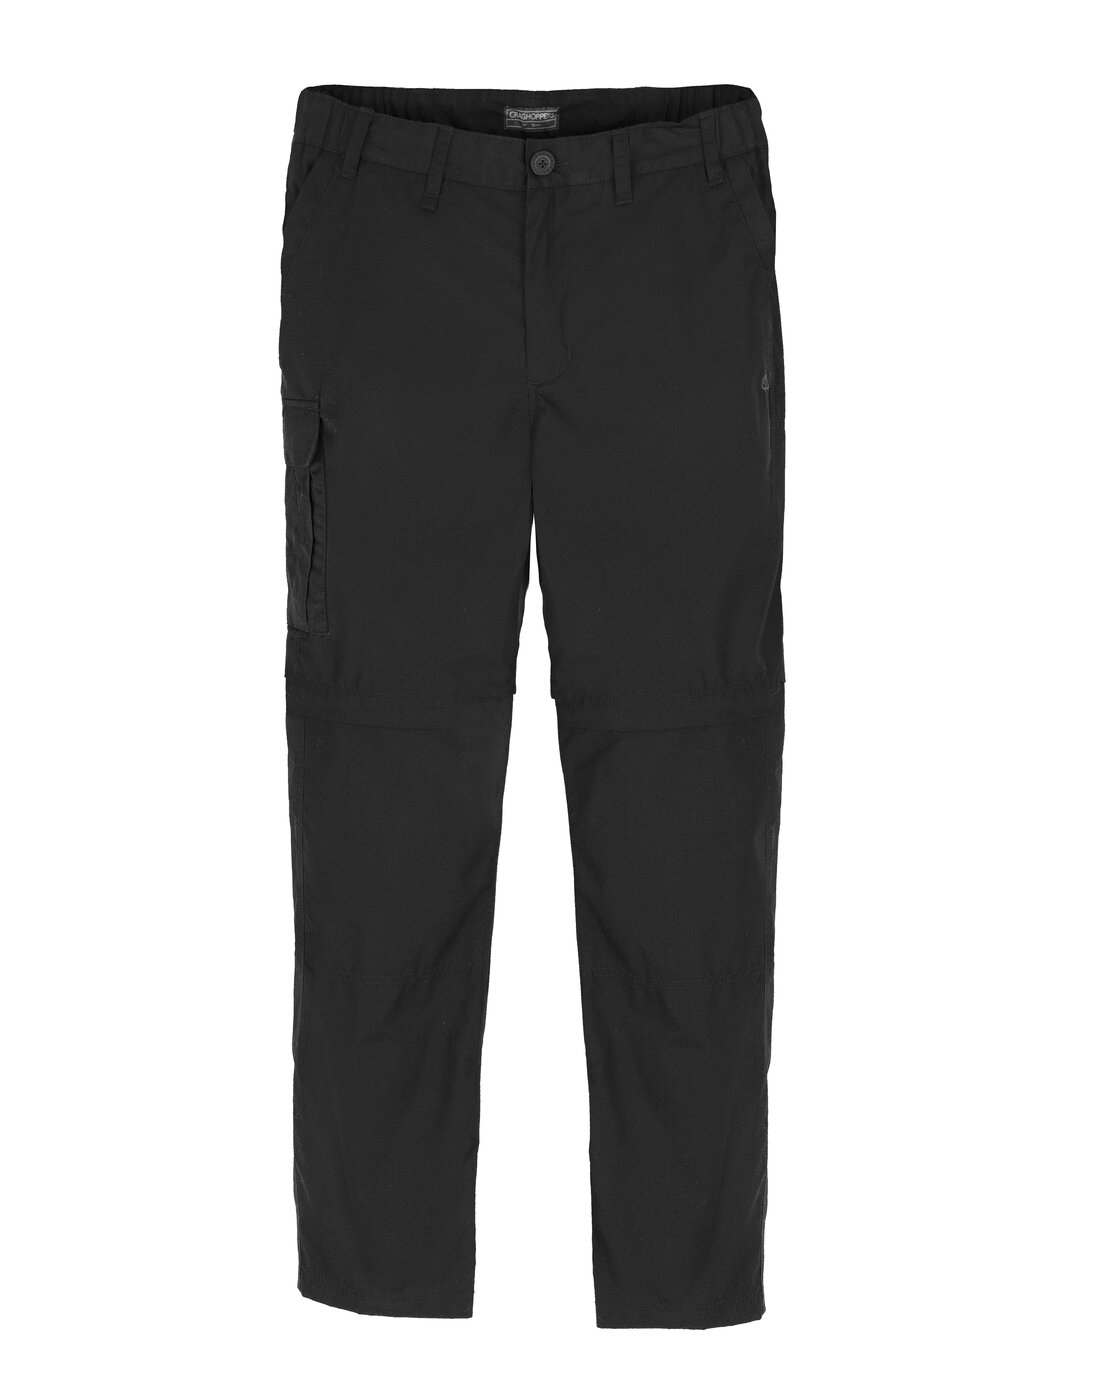 Craghoppers Mens Kiwi Pro Quick Drying Zip Off Convertible Trousers